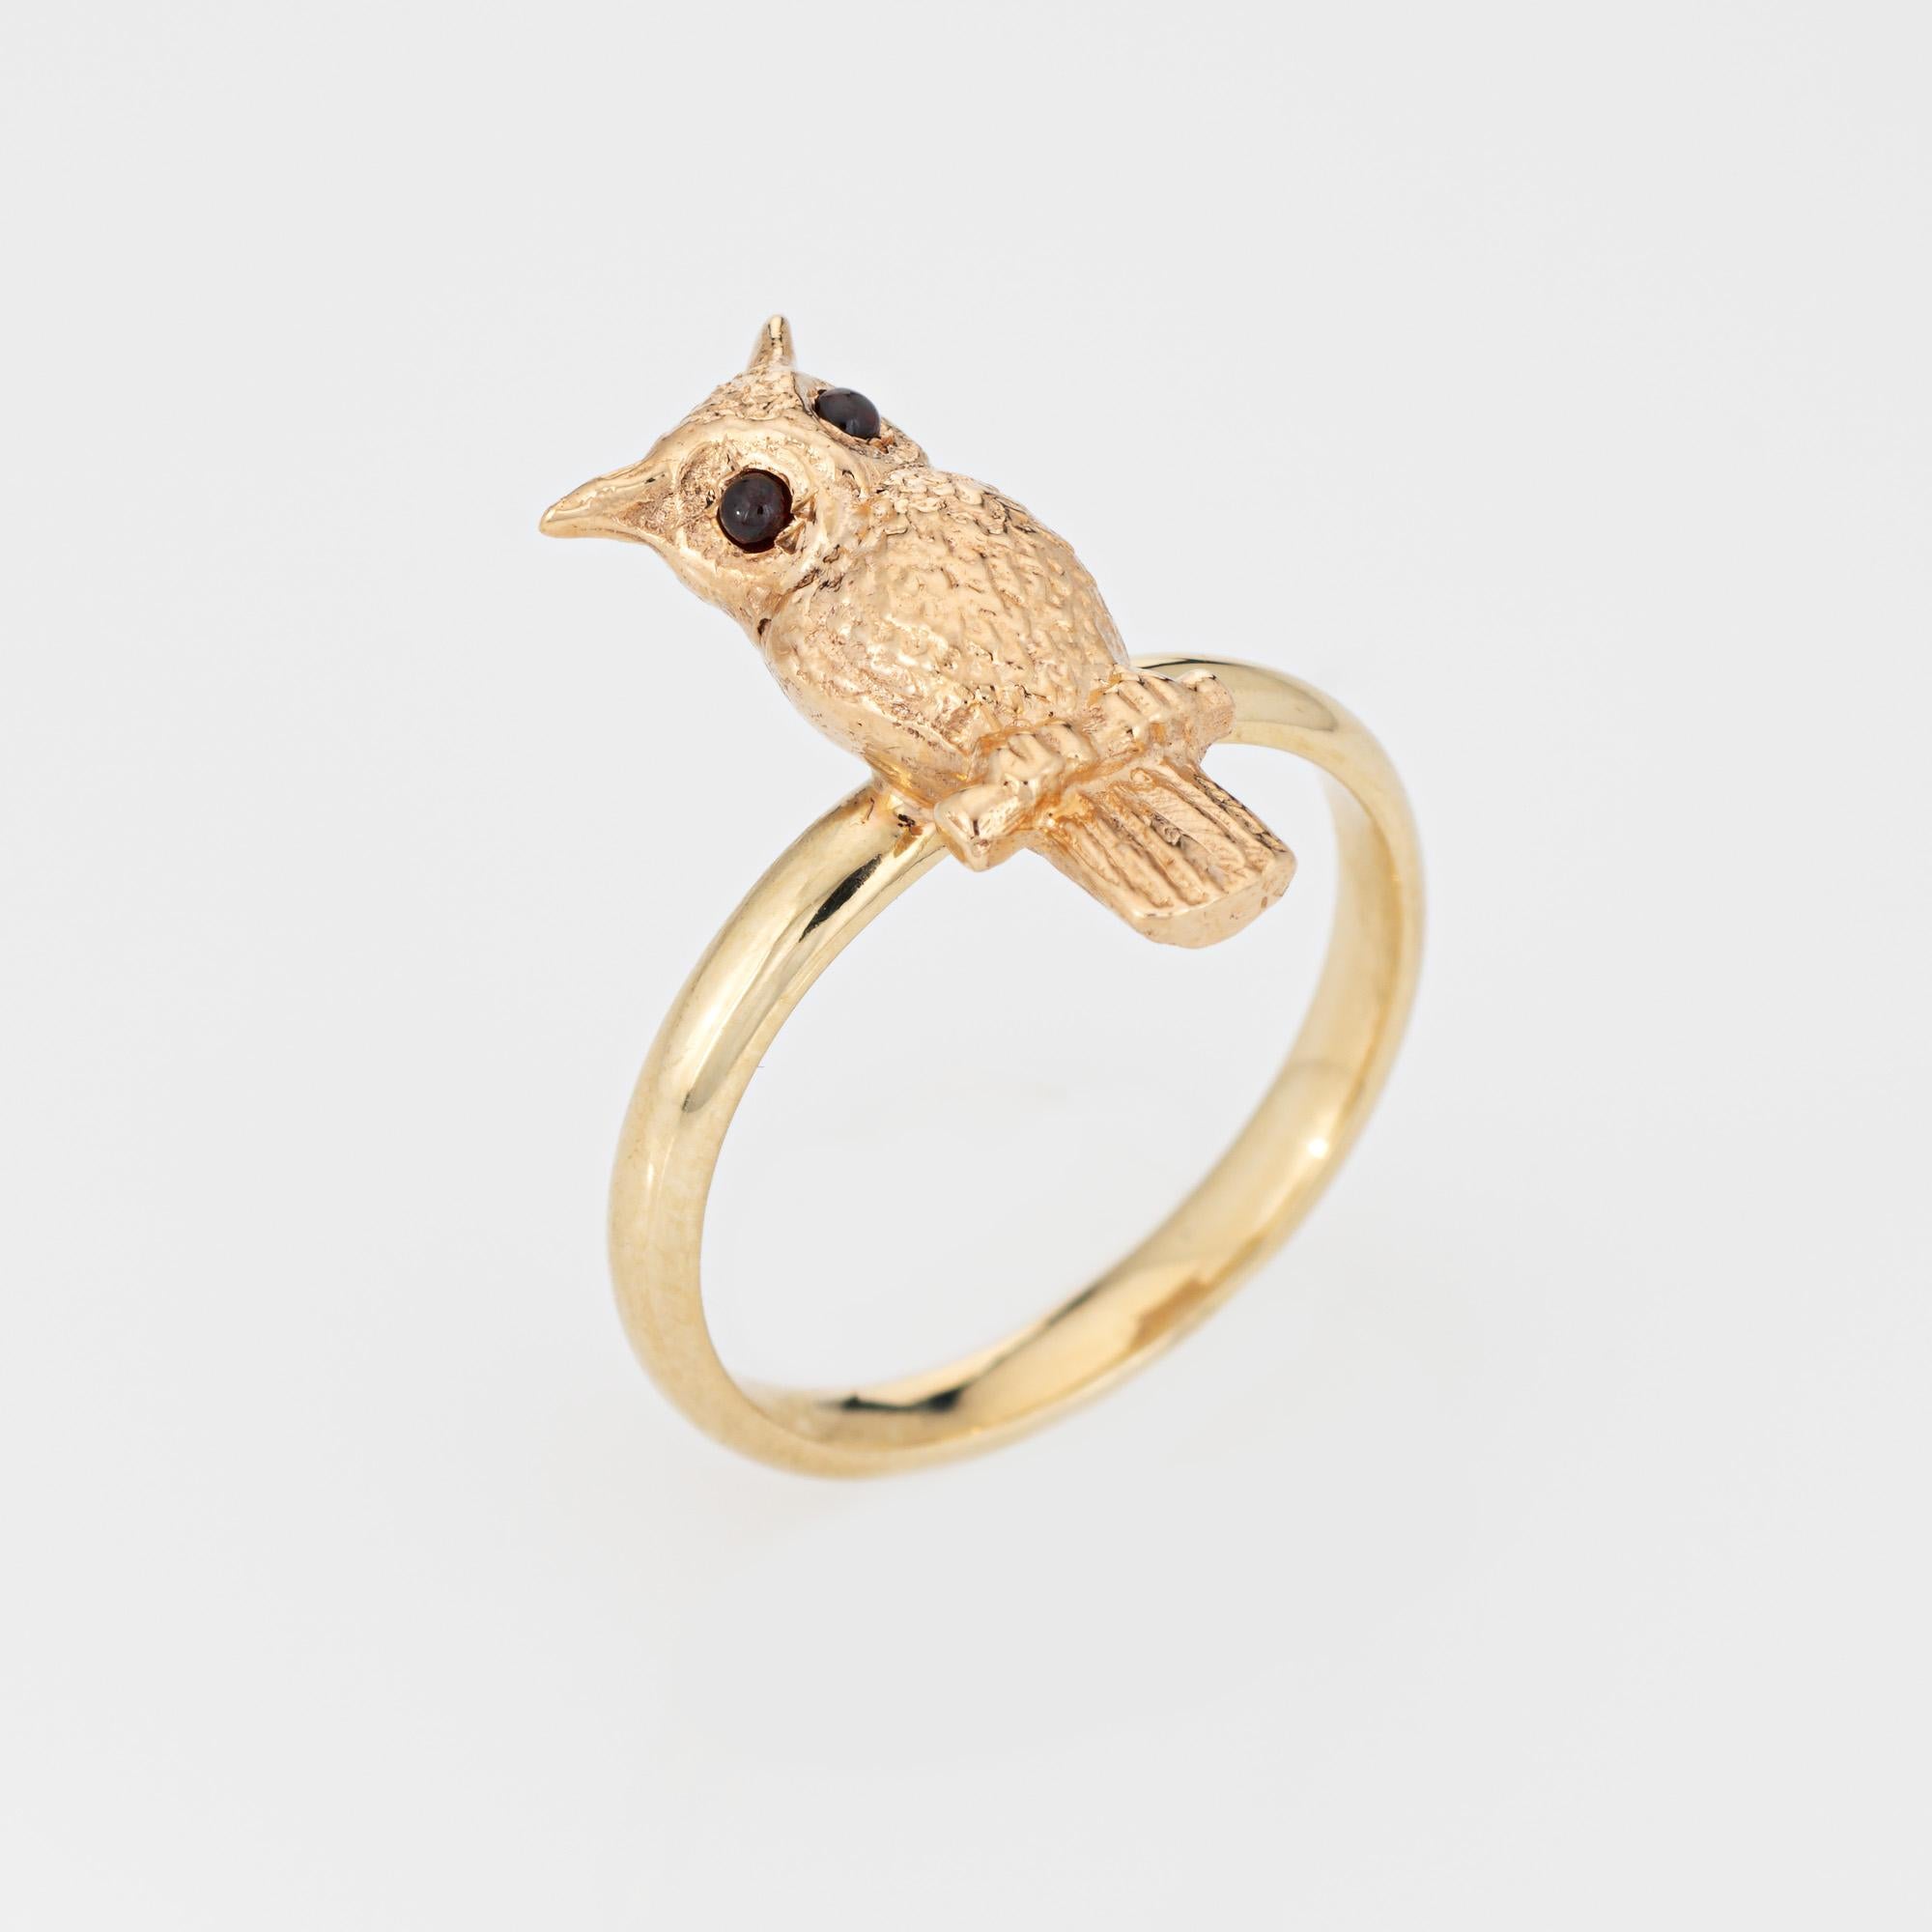 Stylish owl ring set with garnet set eyes, crafted in 14 karat yellow gold. 

Two small cabochon cut garnet measure approx. 1mm. The garnets are in very good condition and free of cracks or chips. 

The beautifully detailed owl is perched on the